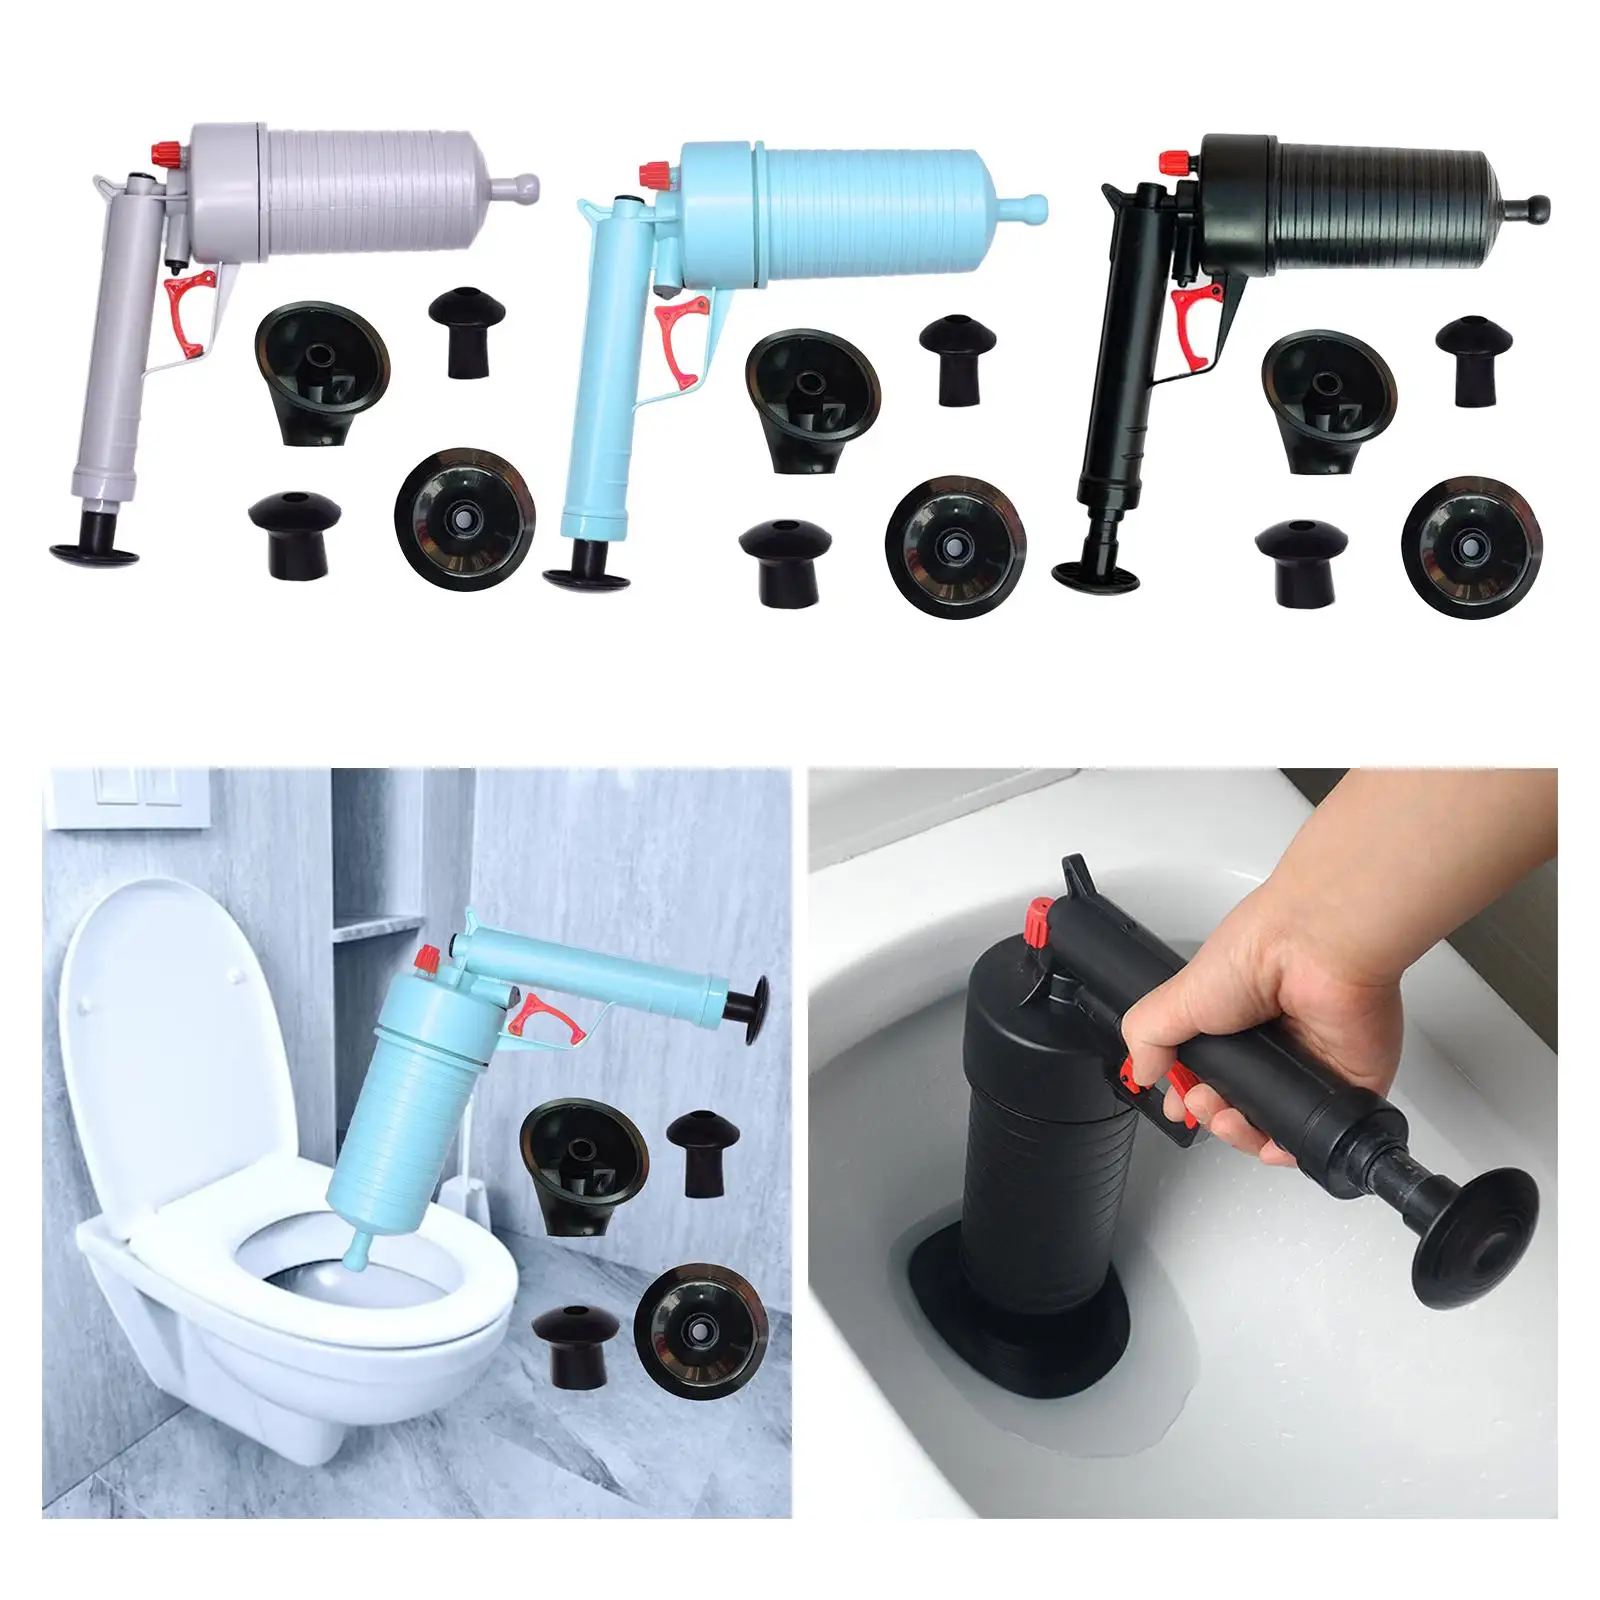 Multi Purpose Toilet Plunger Tub Drain Cleaner Opener and 4 Suction Cups